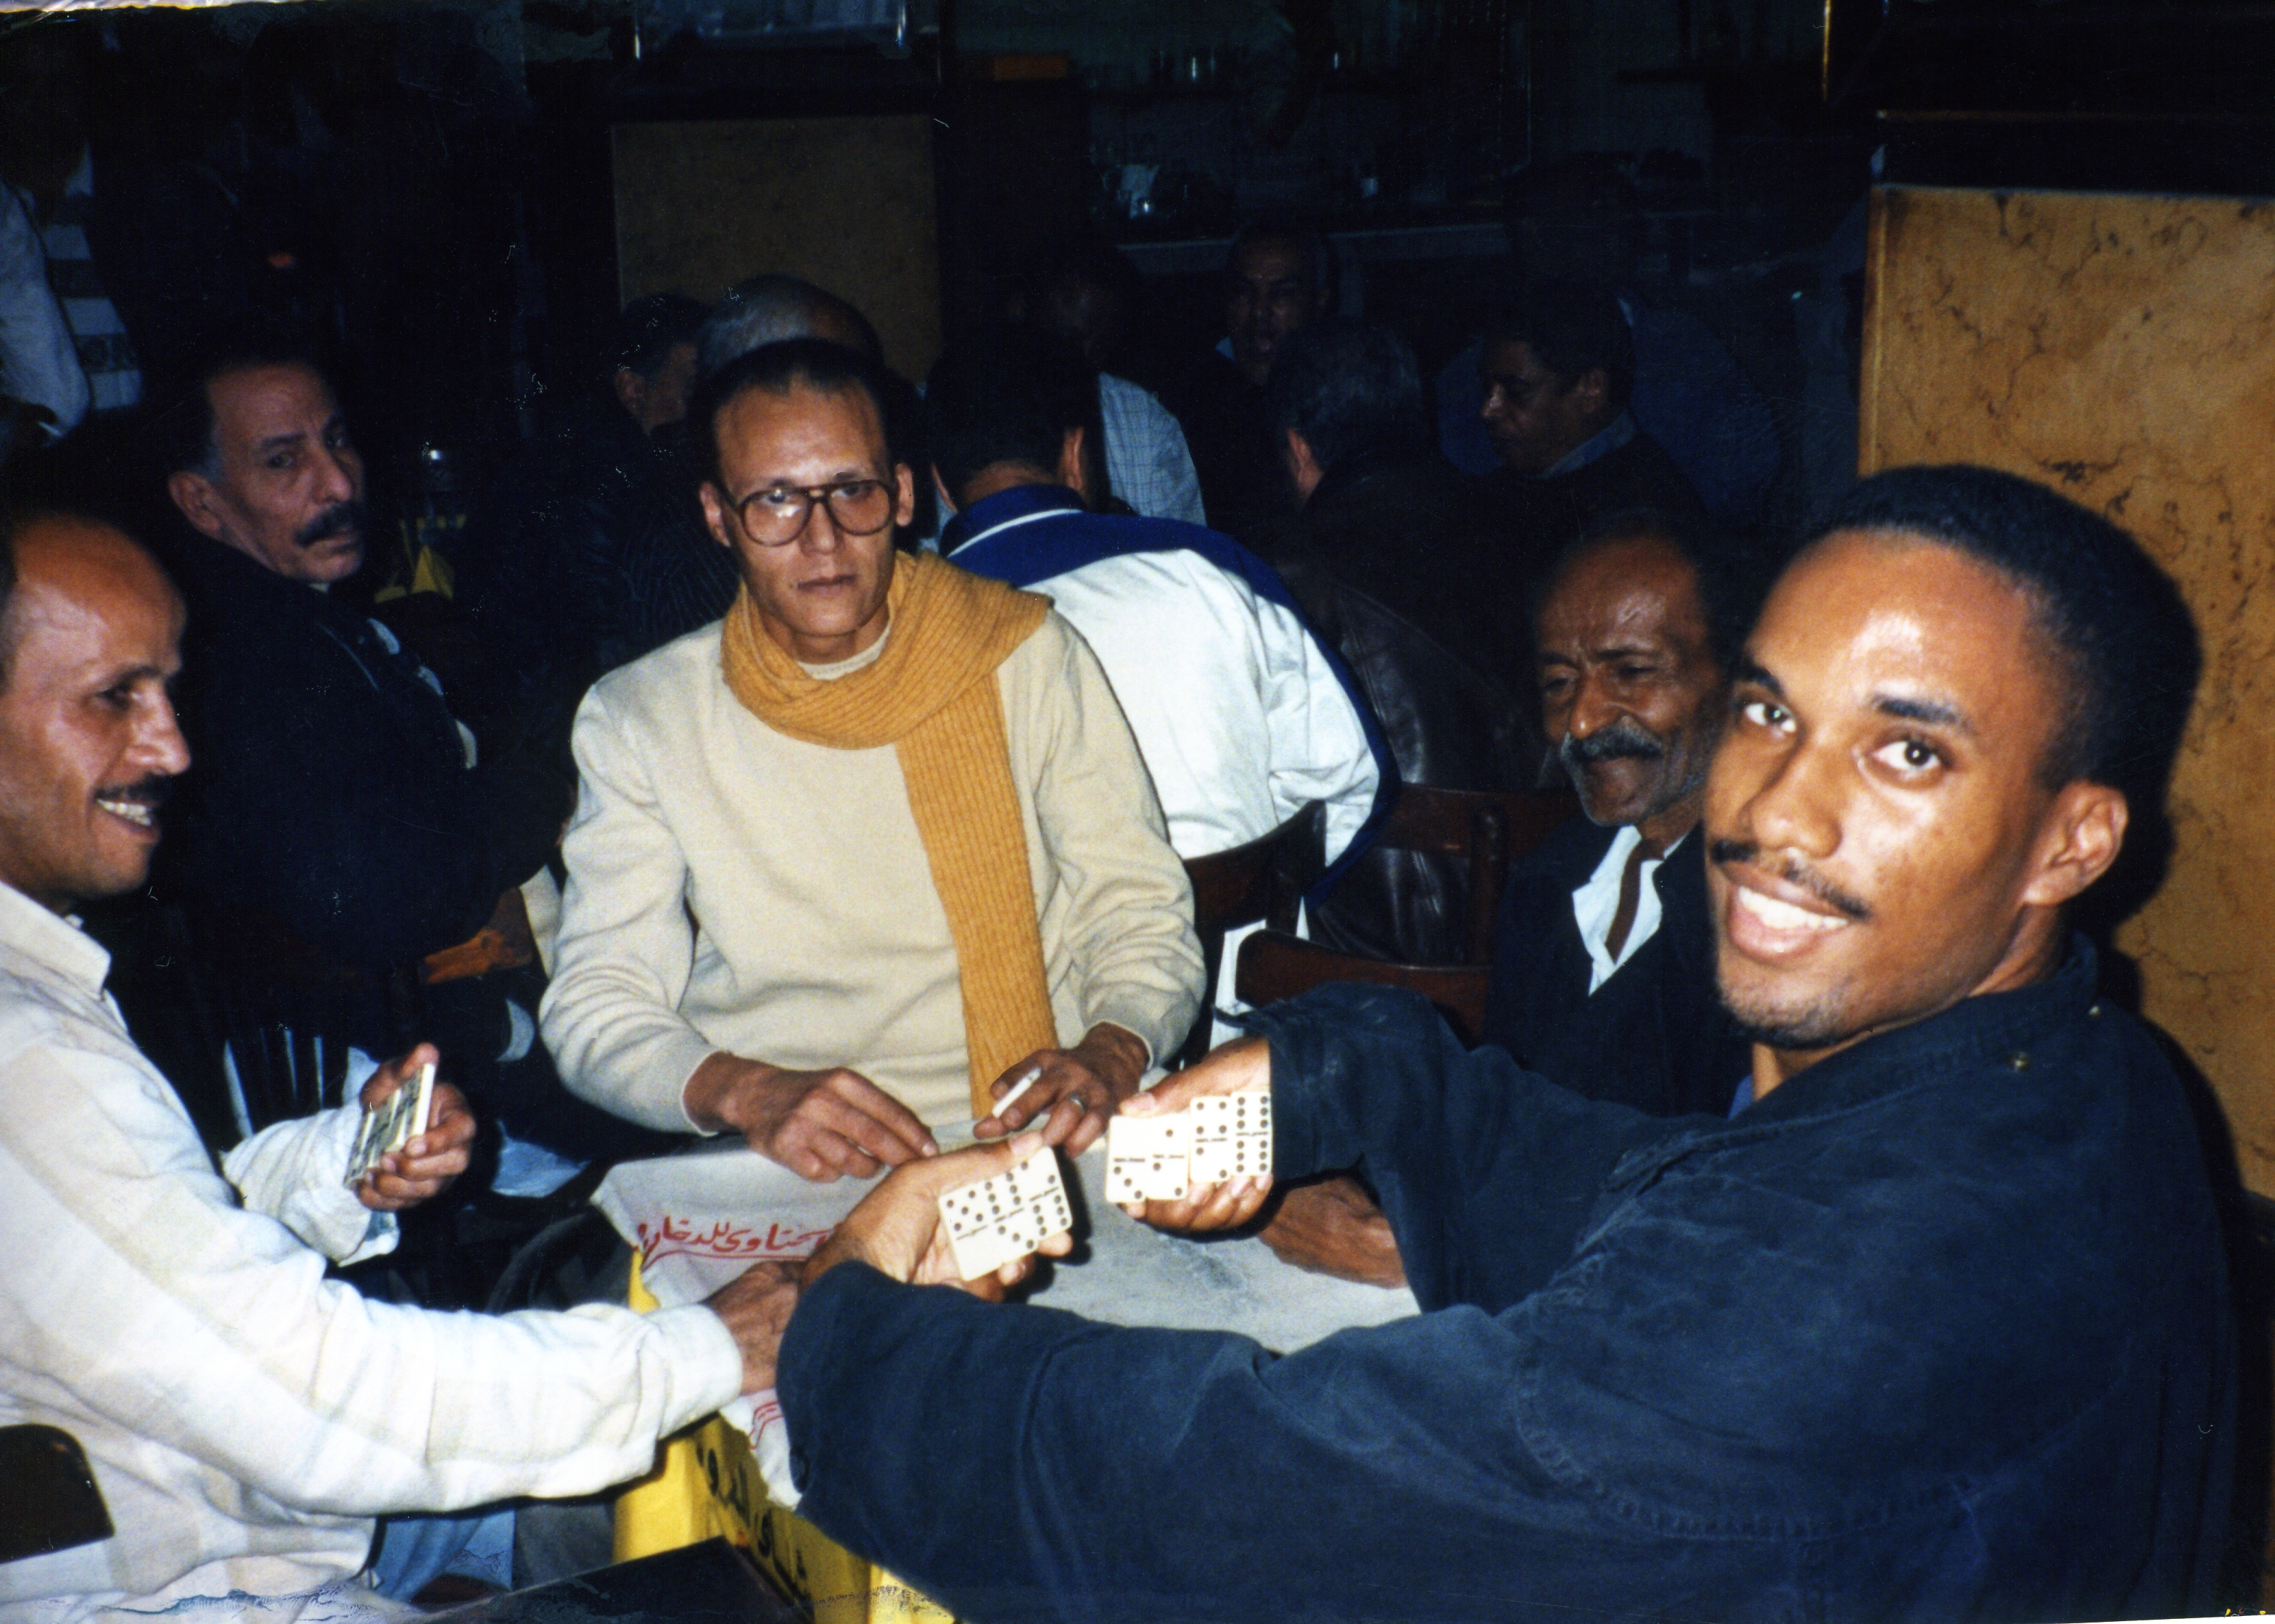 This is me playing dominoes in Cairo, Egypt in the 1990s. I couldn't speak arabic, but my partner and I killed it. Never play against a guy wearing a scarf with that much confidence.